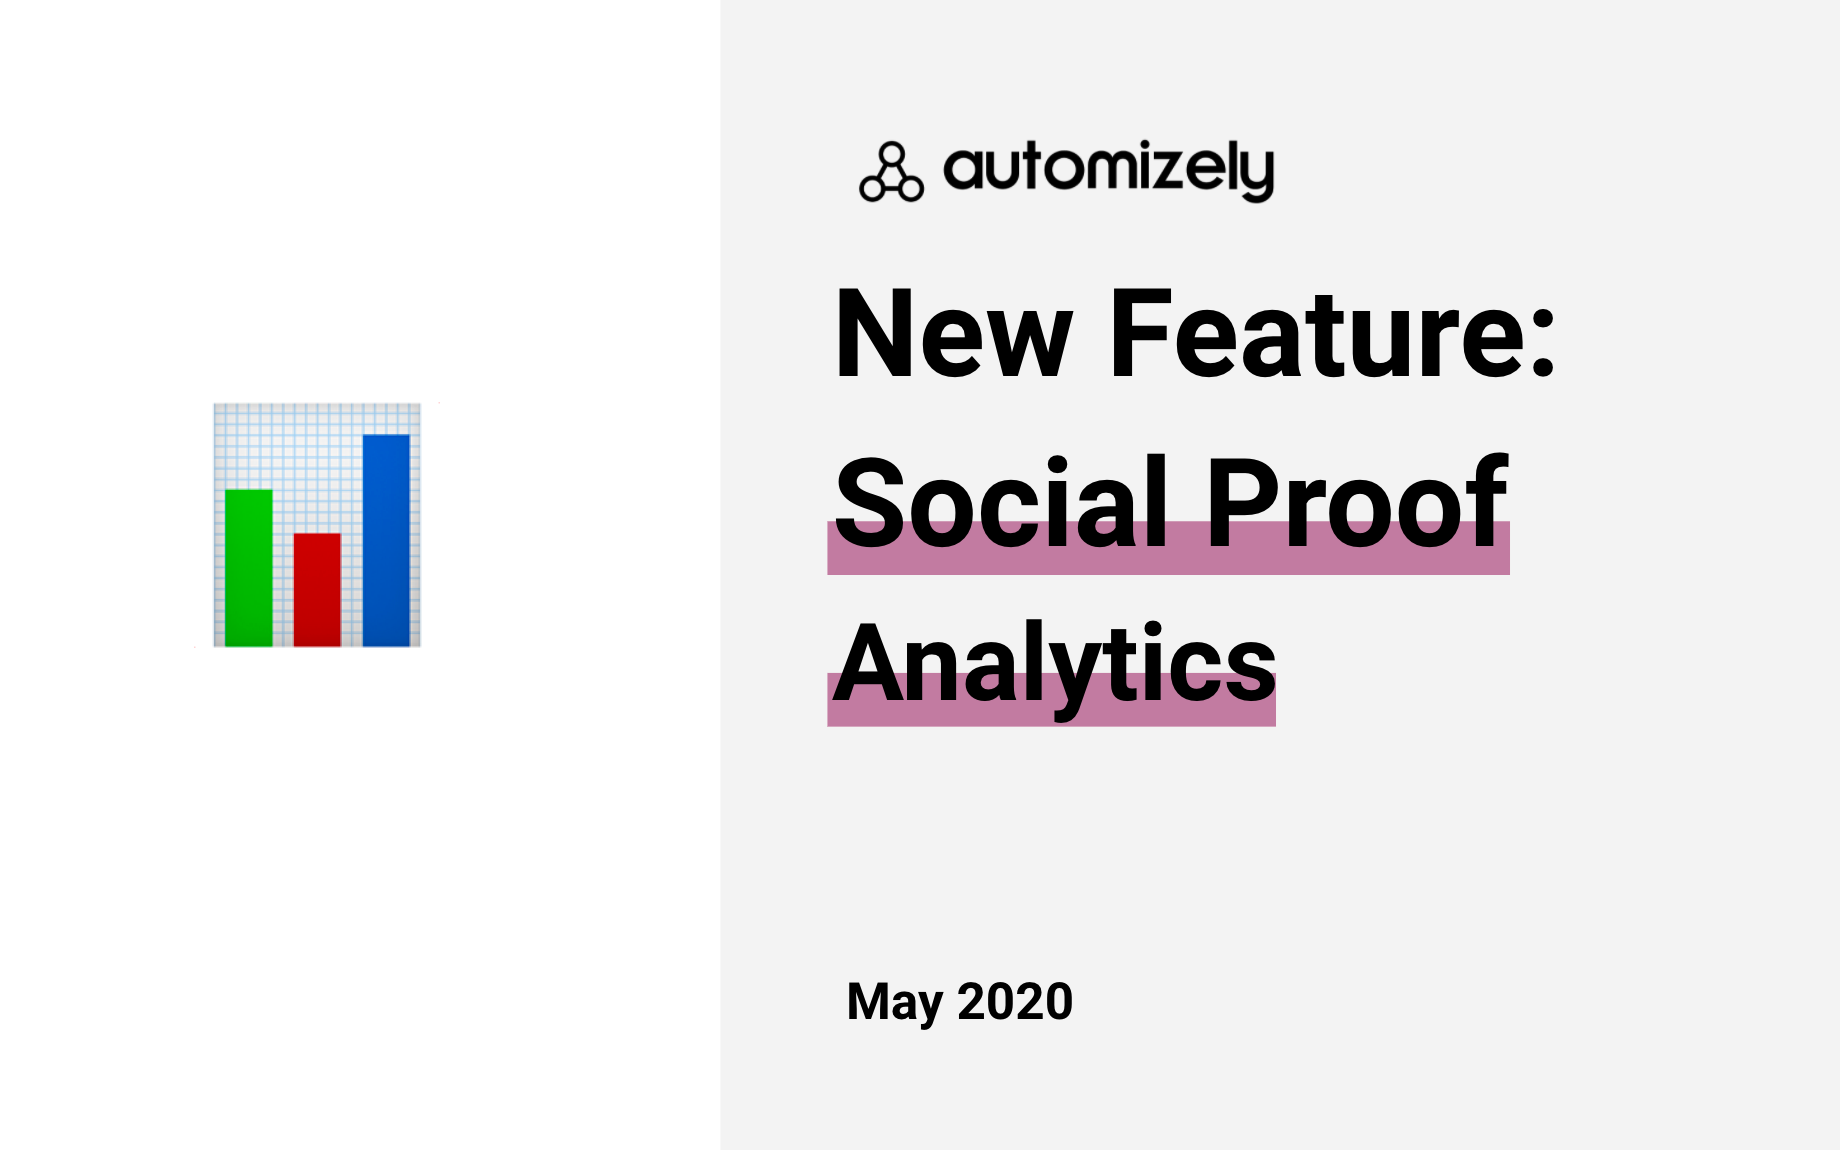 New Feature: Social Proof Analytics